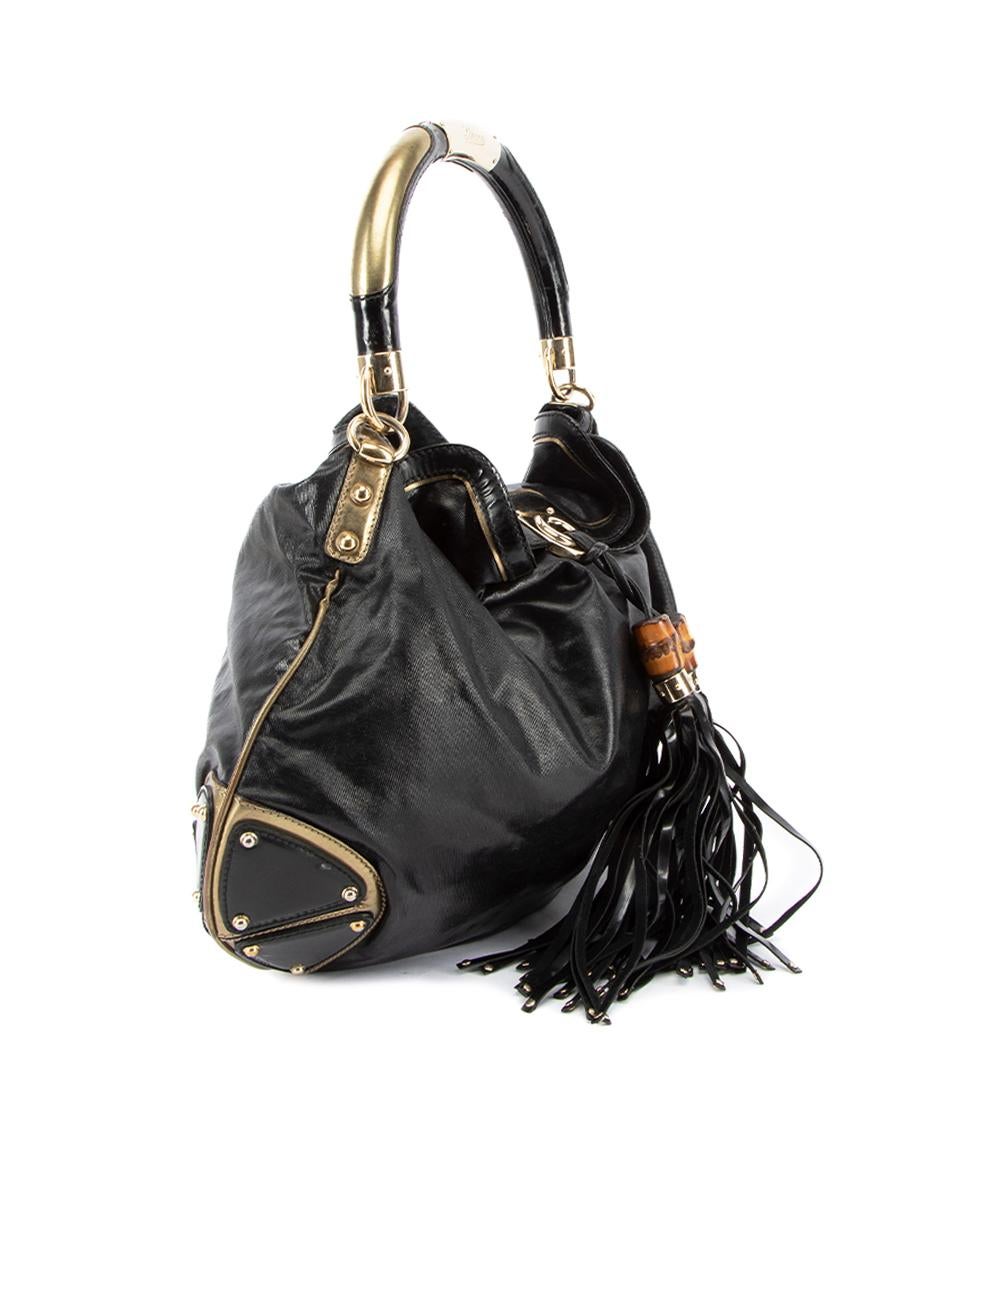 CONDITION is Very good. Minimal wear to bag is evident. Marks can be seen to handle on this used Gucci designer resale item. This item comes with original dust bag.   Details  Black Cloth textile Large hobo bag 2x Oversized tassel with bamboo accent